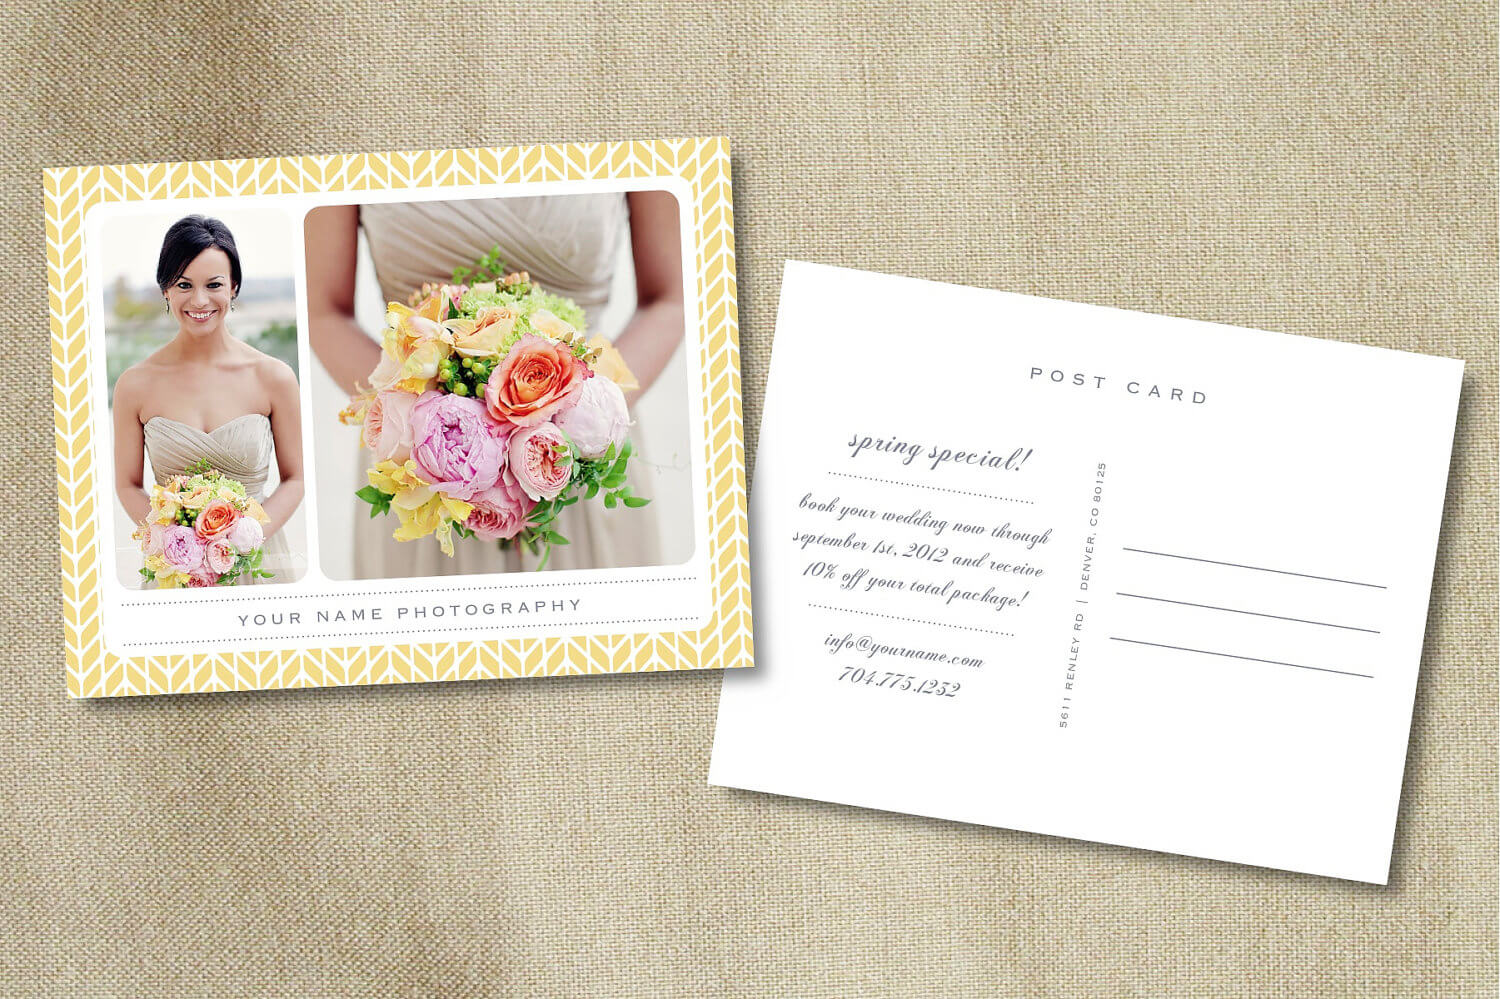 19 Postcard Psd Template Images – What Does A Postcard Look In Back Of Postcard Template Photoshop